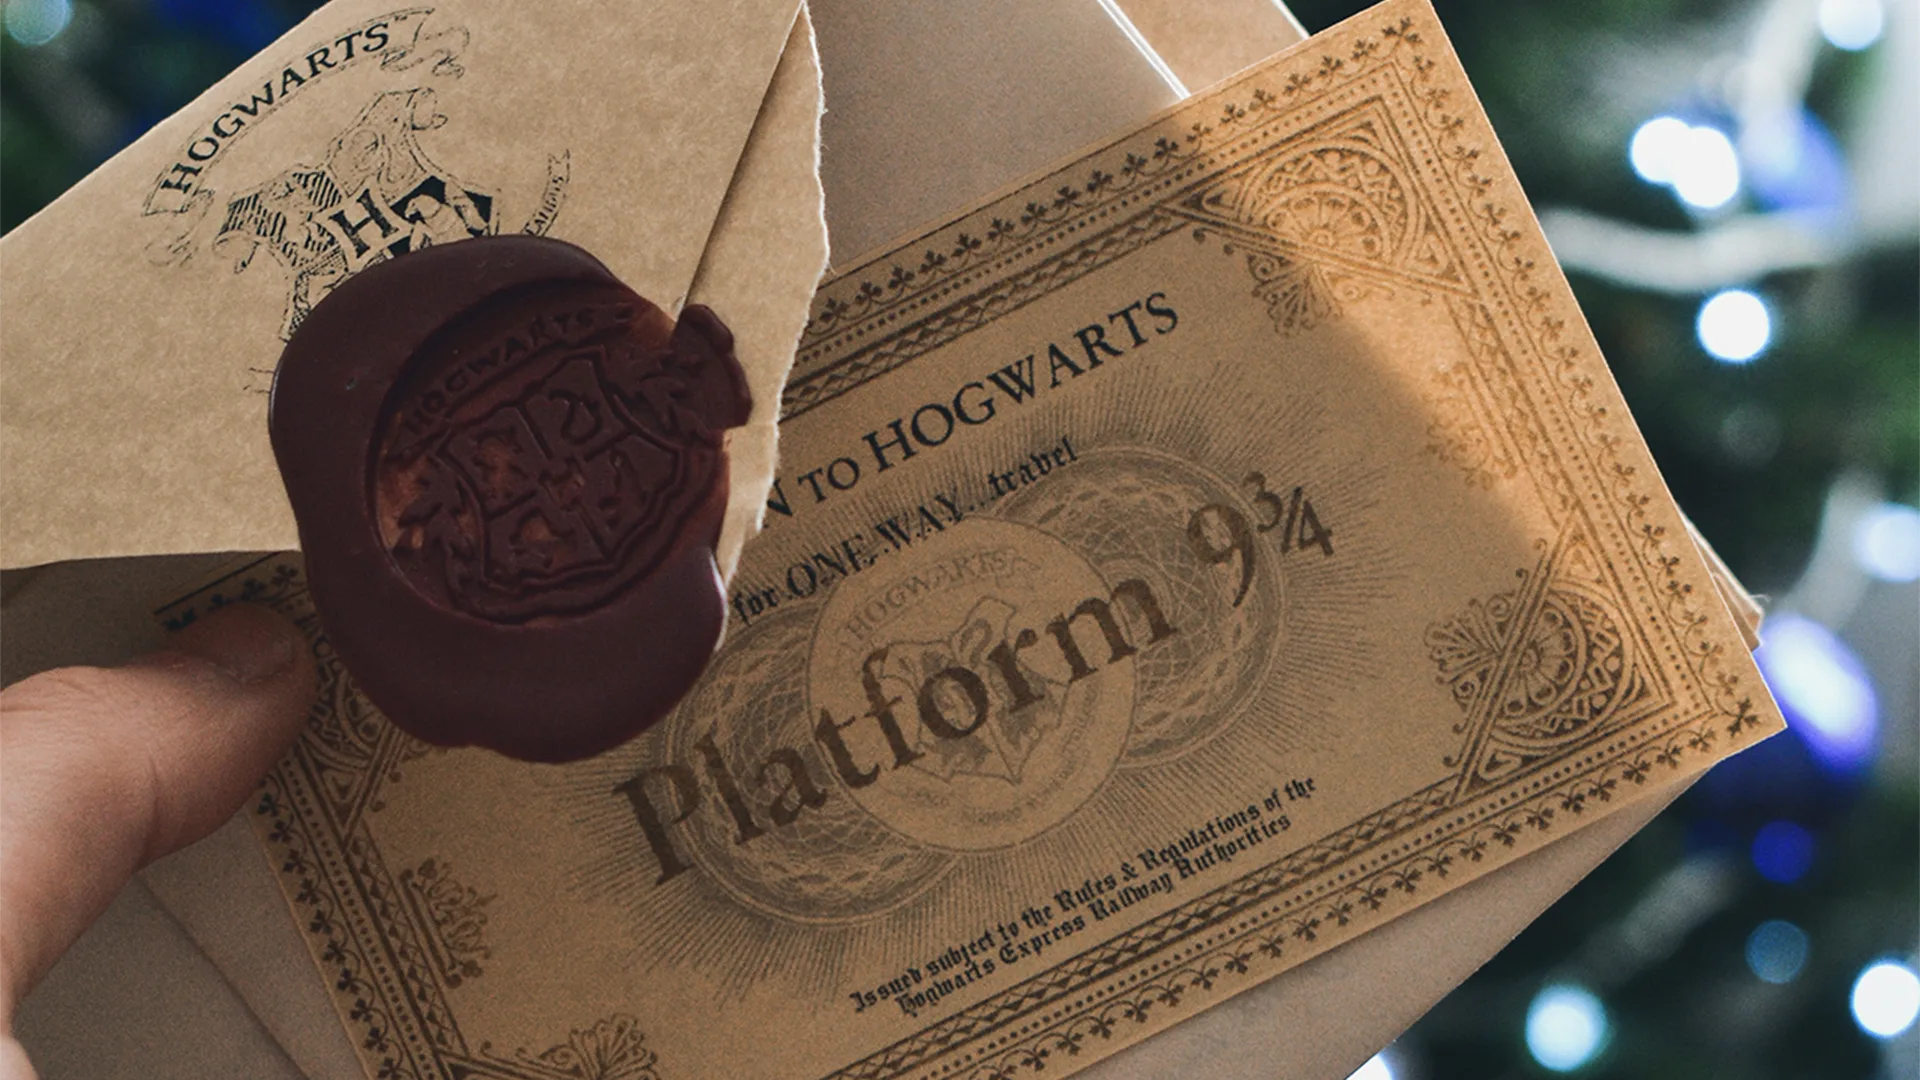 A ticket to Hogwarts